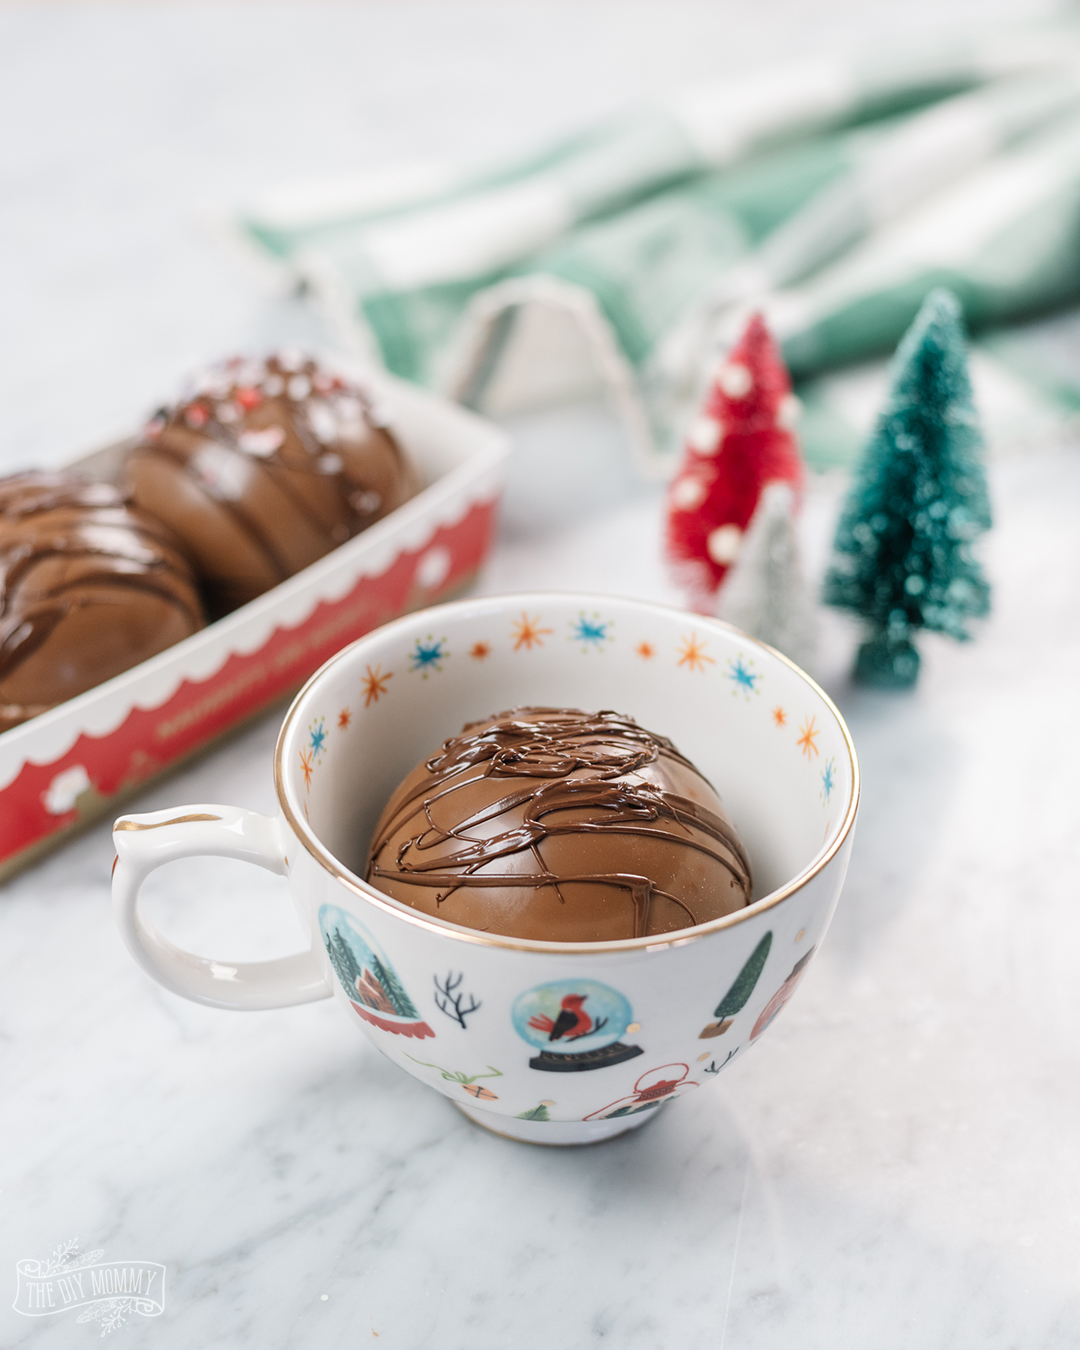 DIY Cocoa ball in a pretty china tea cup. I'm sure that this will make the perfect gift idea for any teacher.